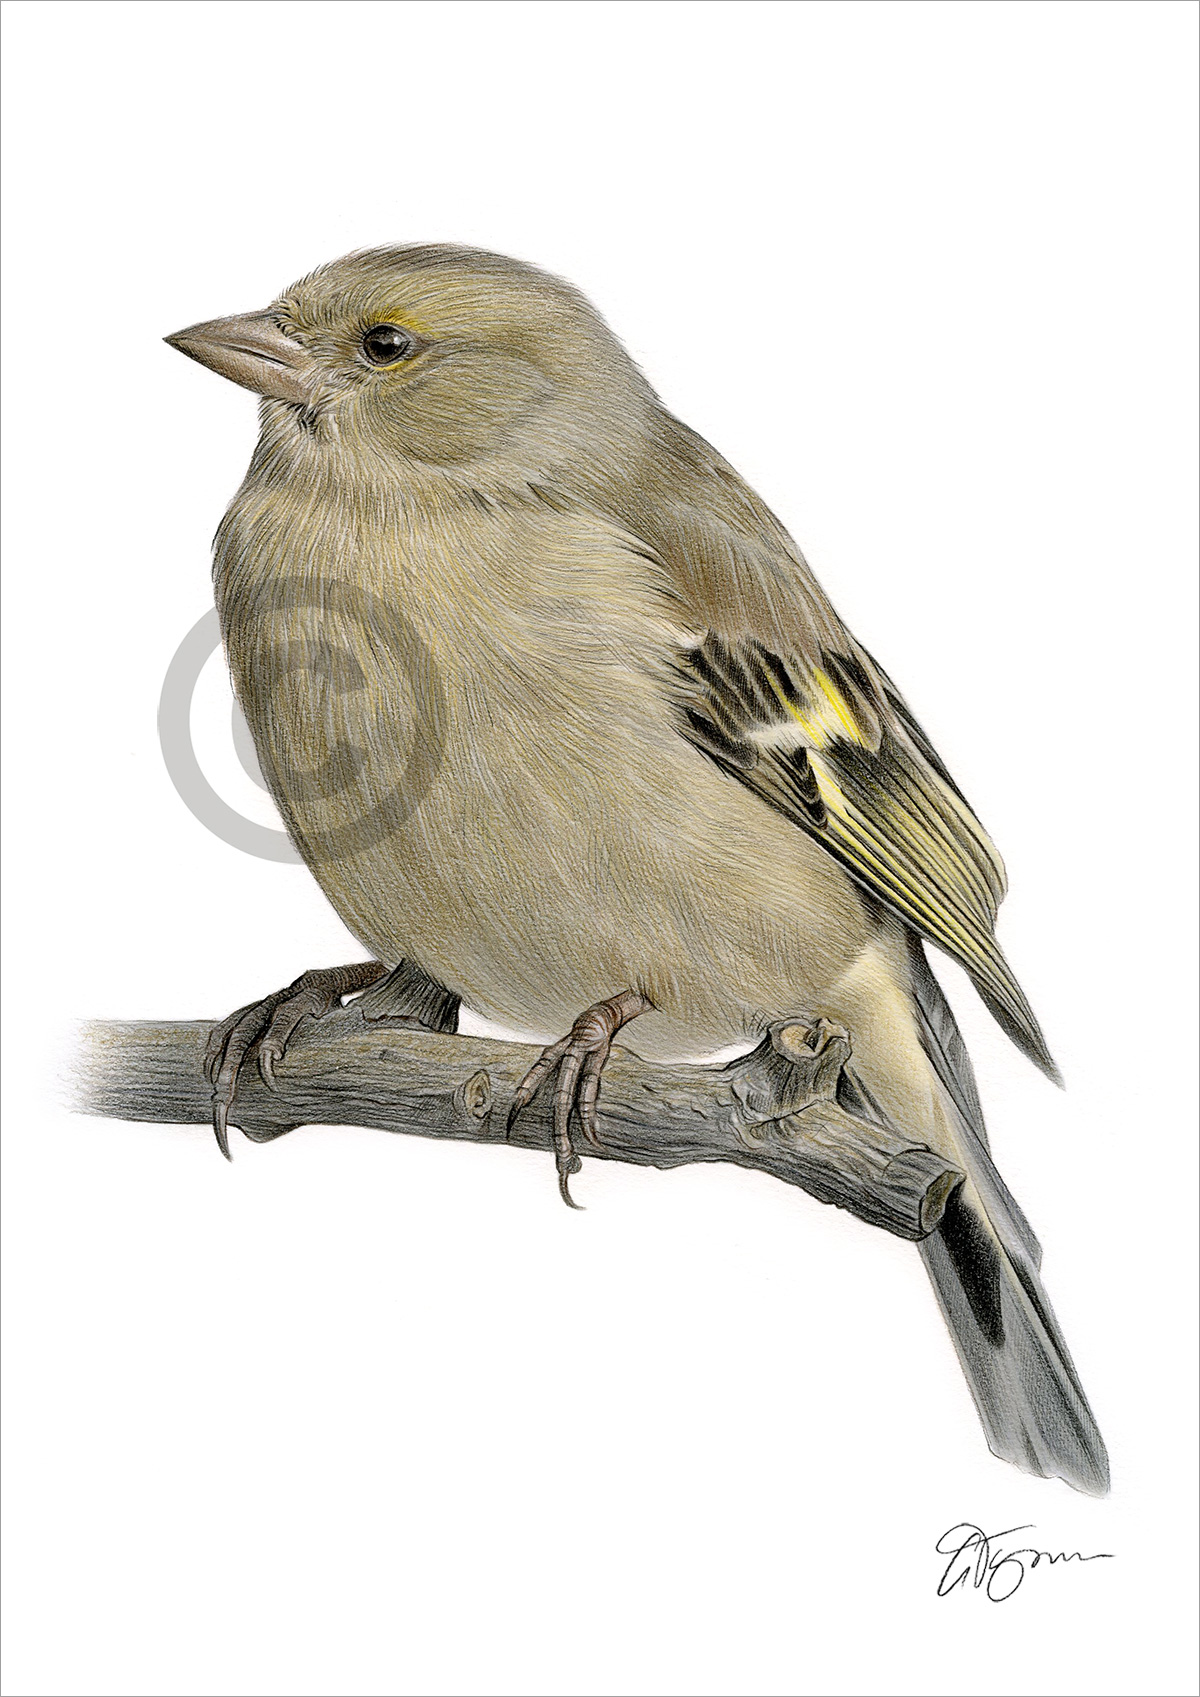 Colour pencil drawing of a female chaffinch by artist Gary Tymon